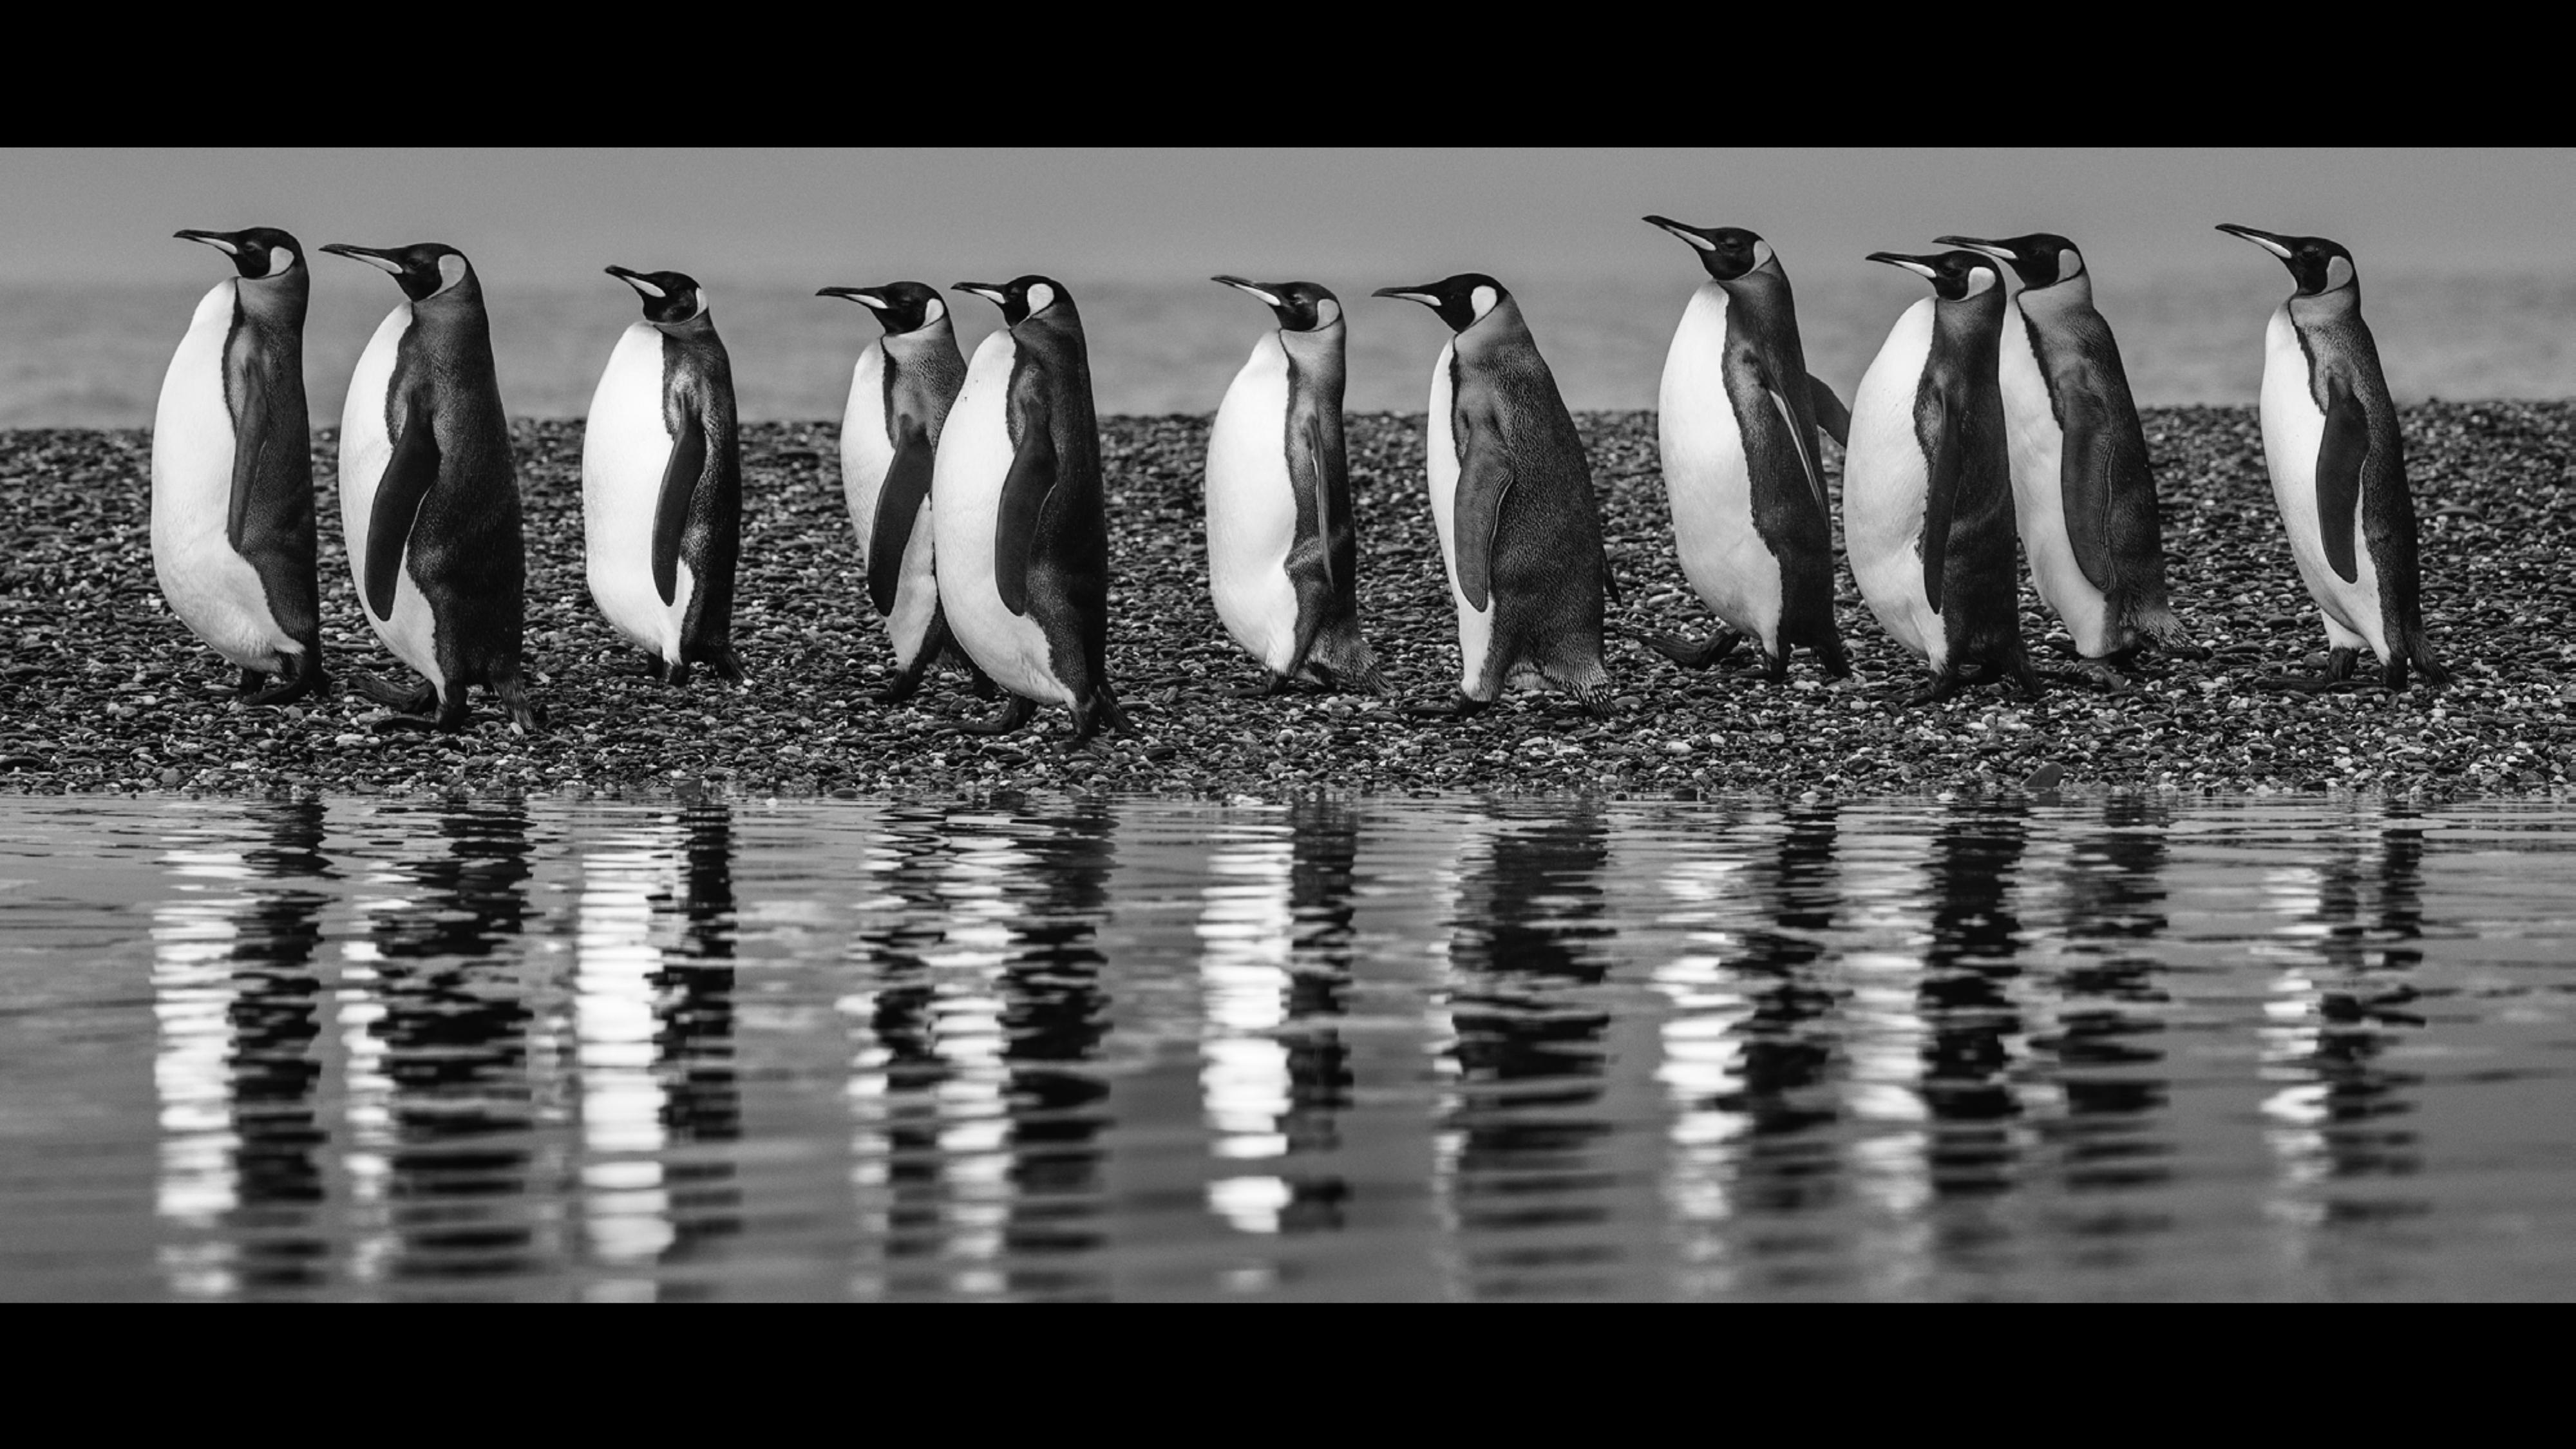 David Yarrow Black and White Photograph - Ocean's Eleven